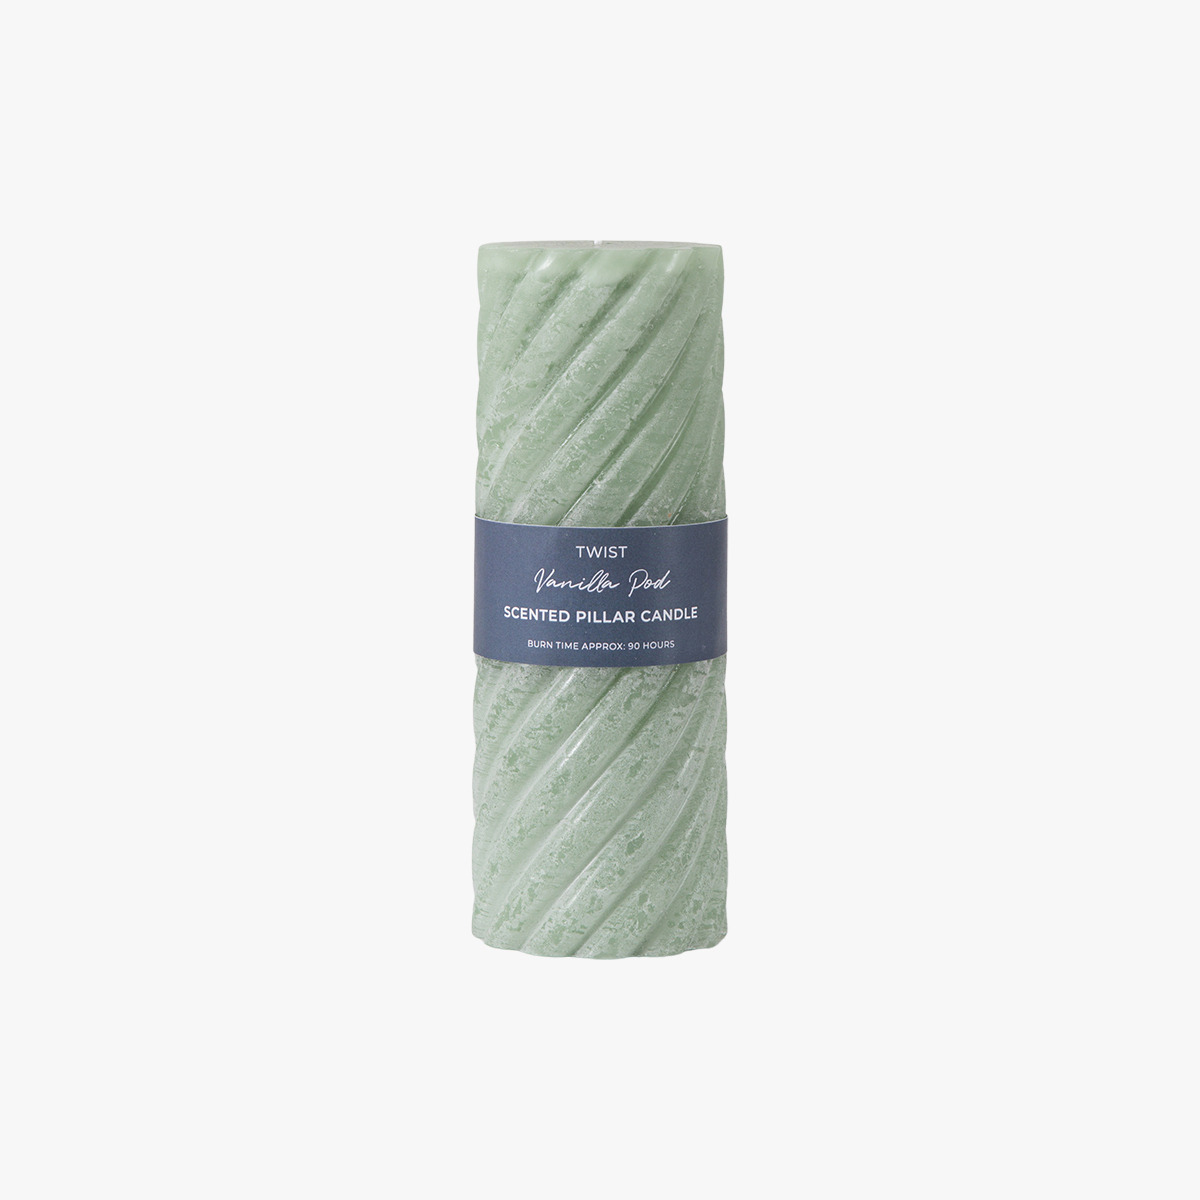 Entwine Pillar Candle in Sage  Large Pack of 2